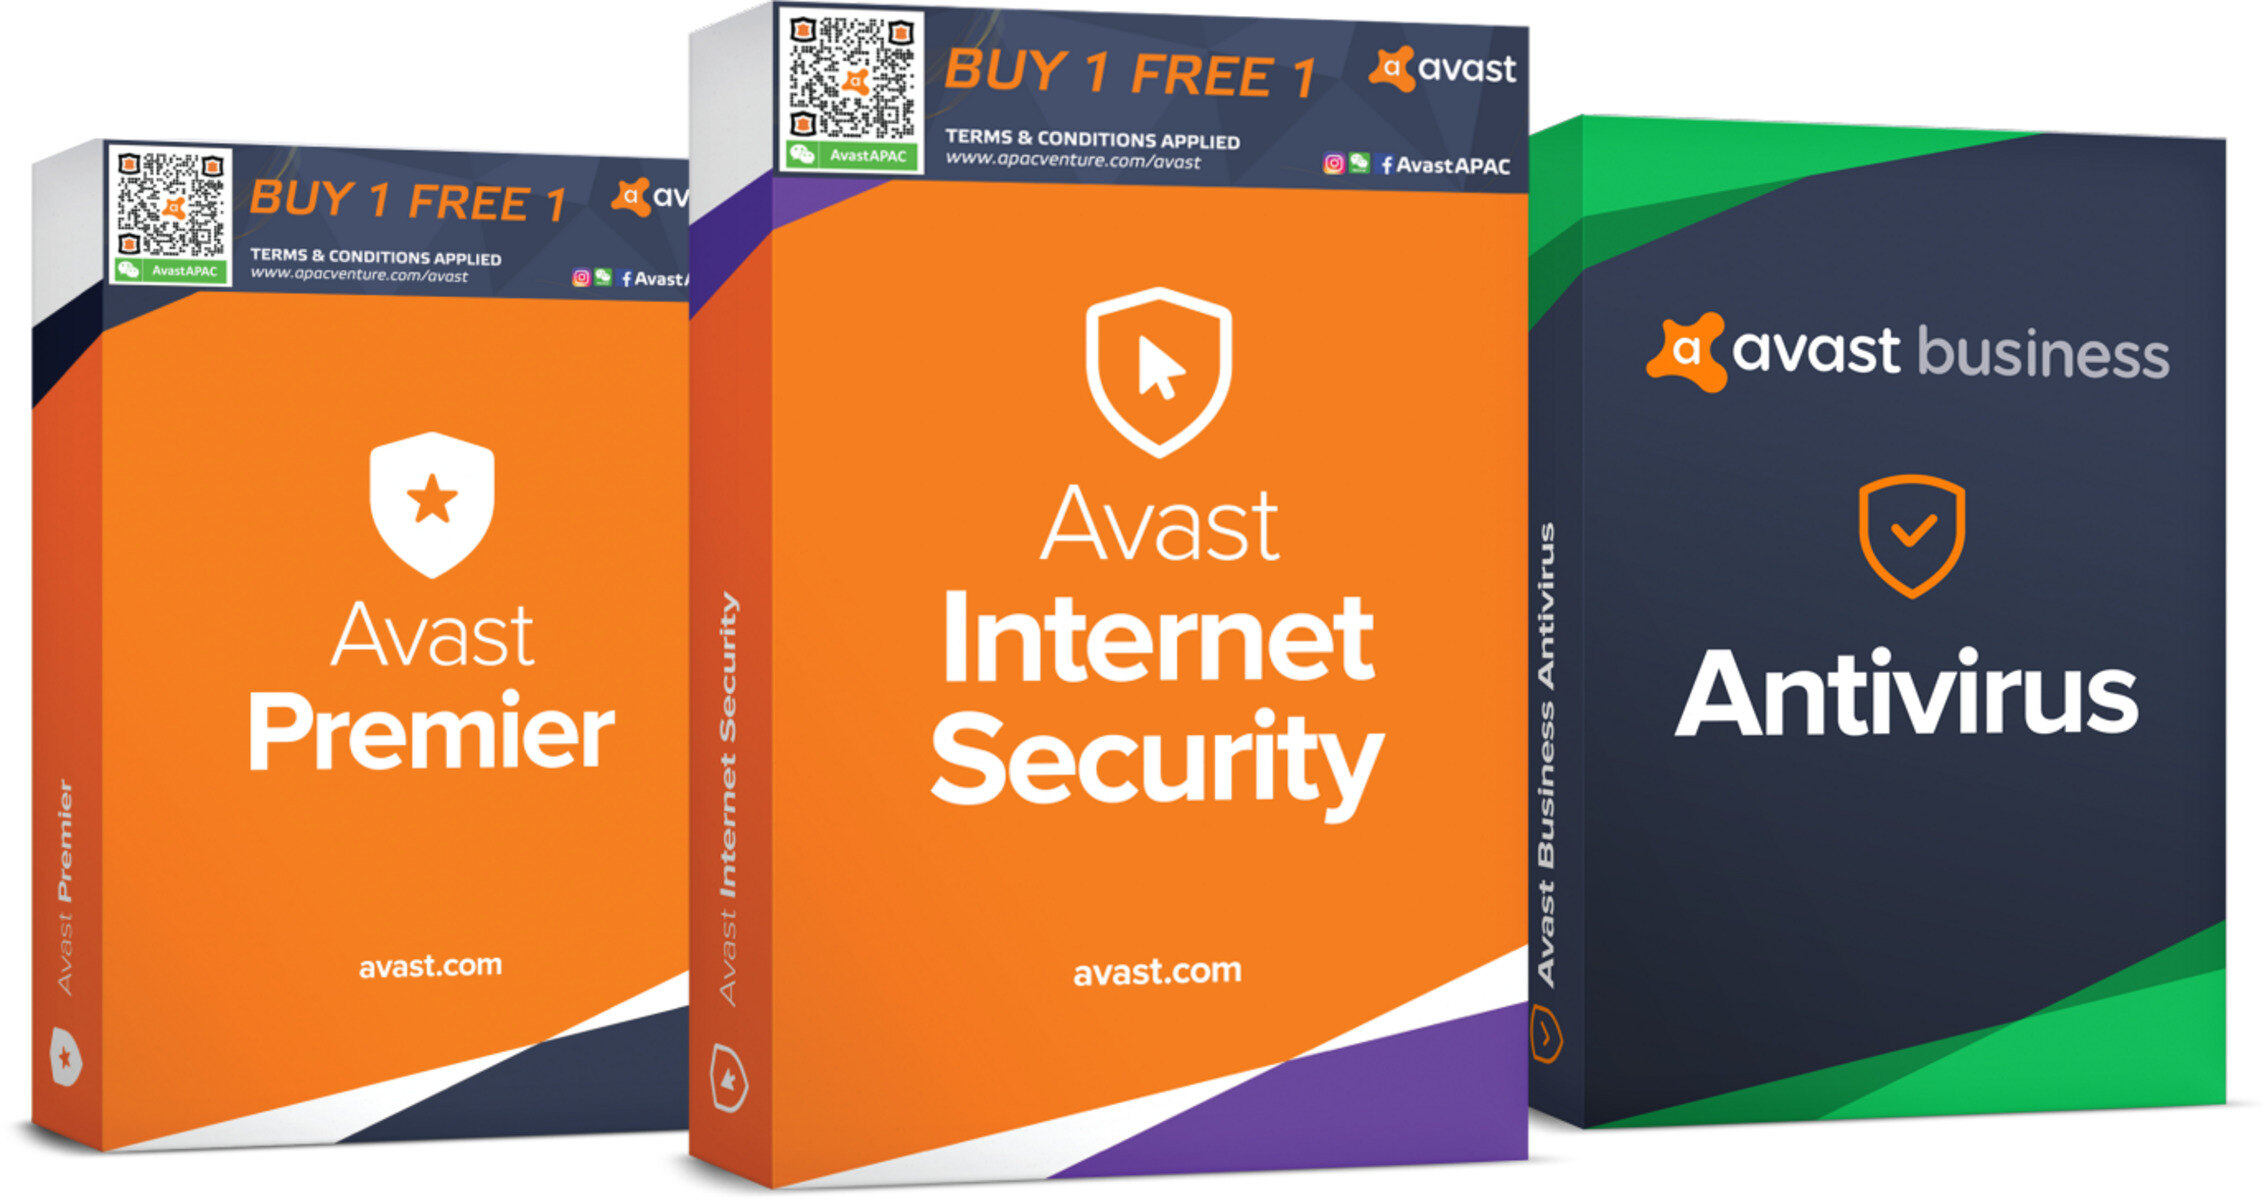 What Is The Difference Between Avast Internet Security And Avast Premier